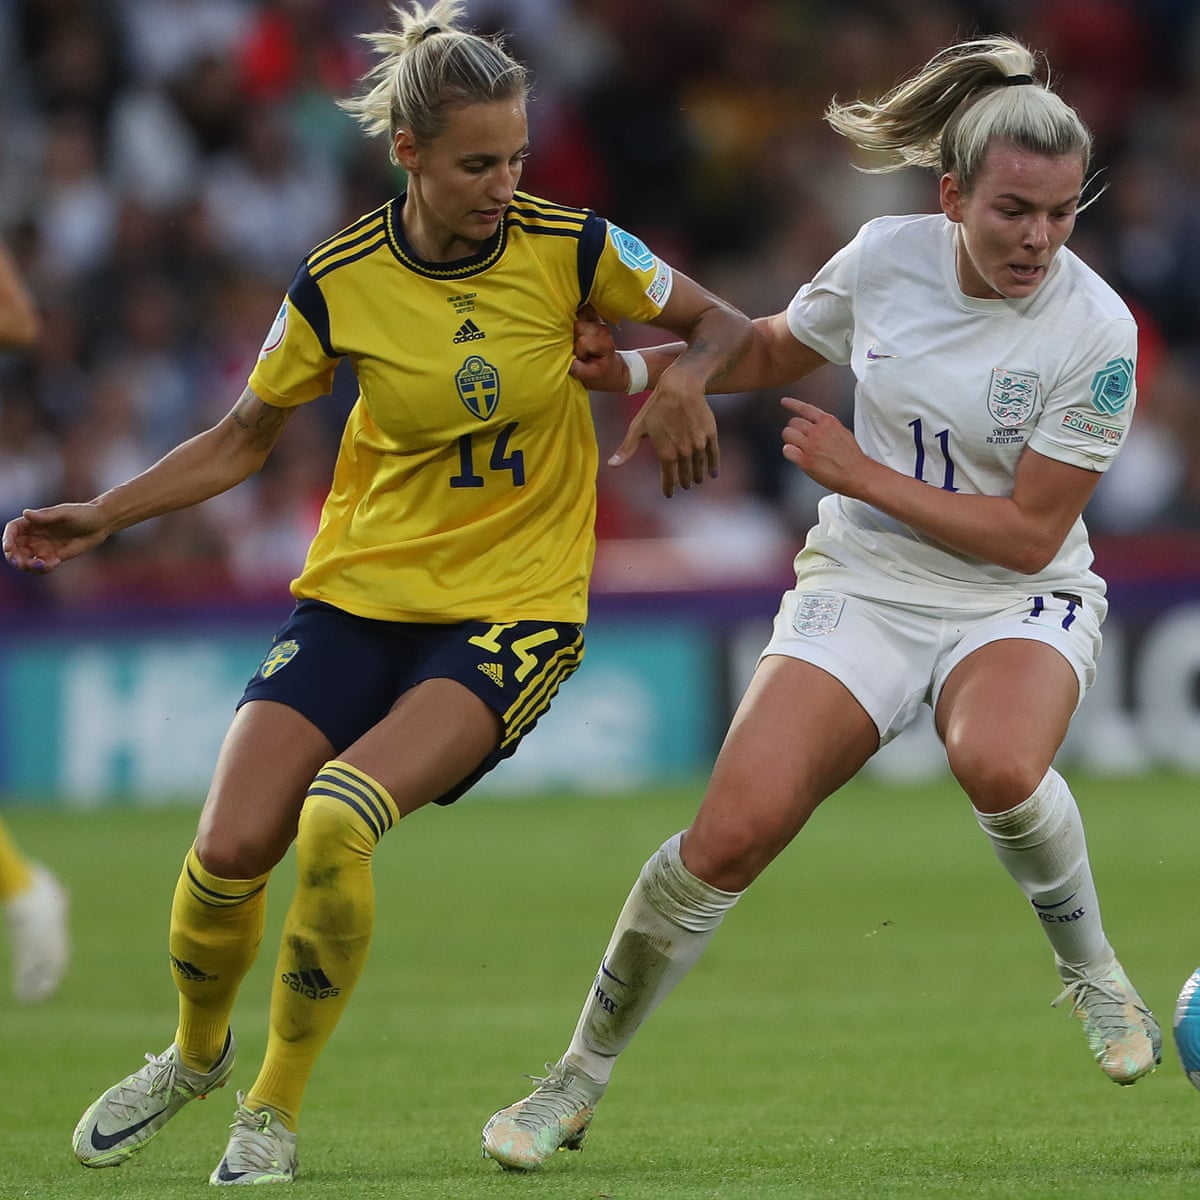 The Euros prove it: women's football is not like men's – and that's good |  Jen Offord | The Guardian